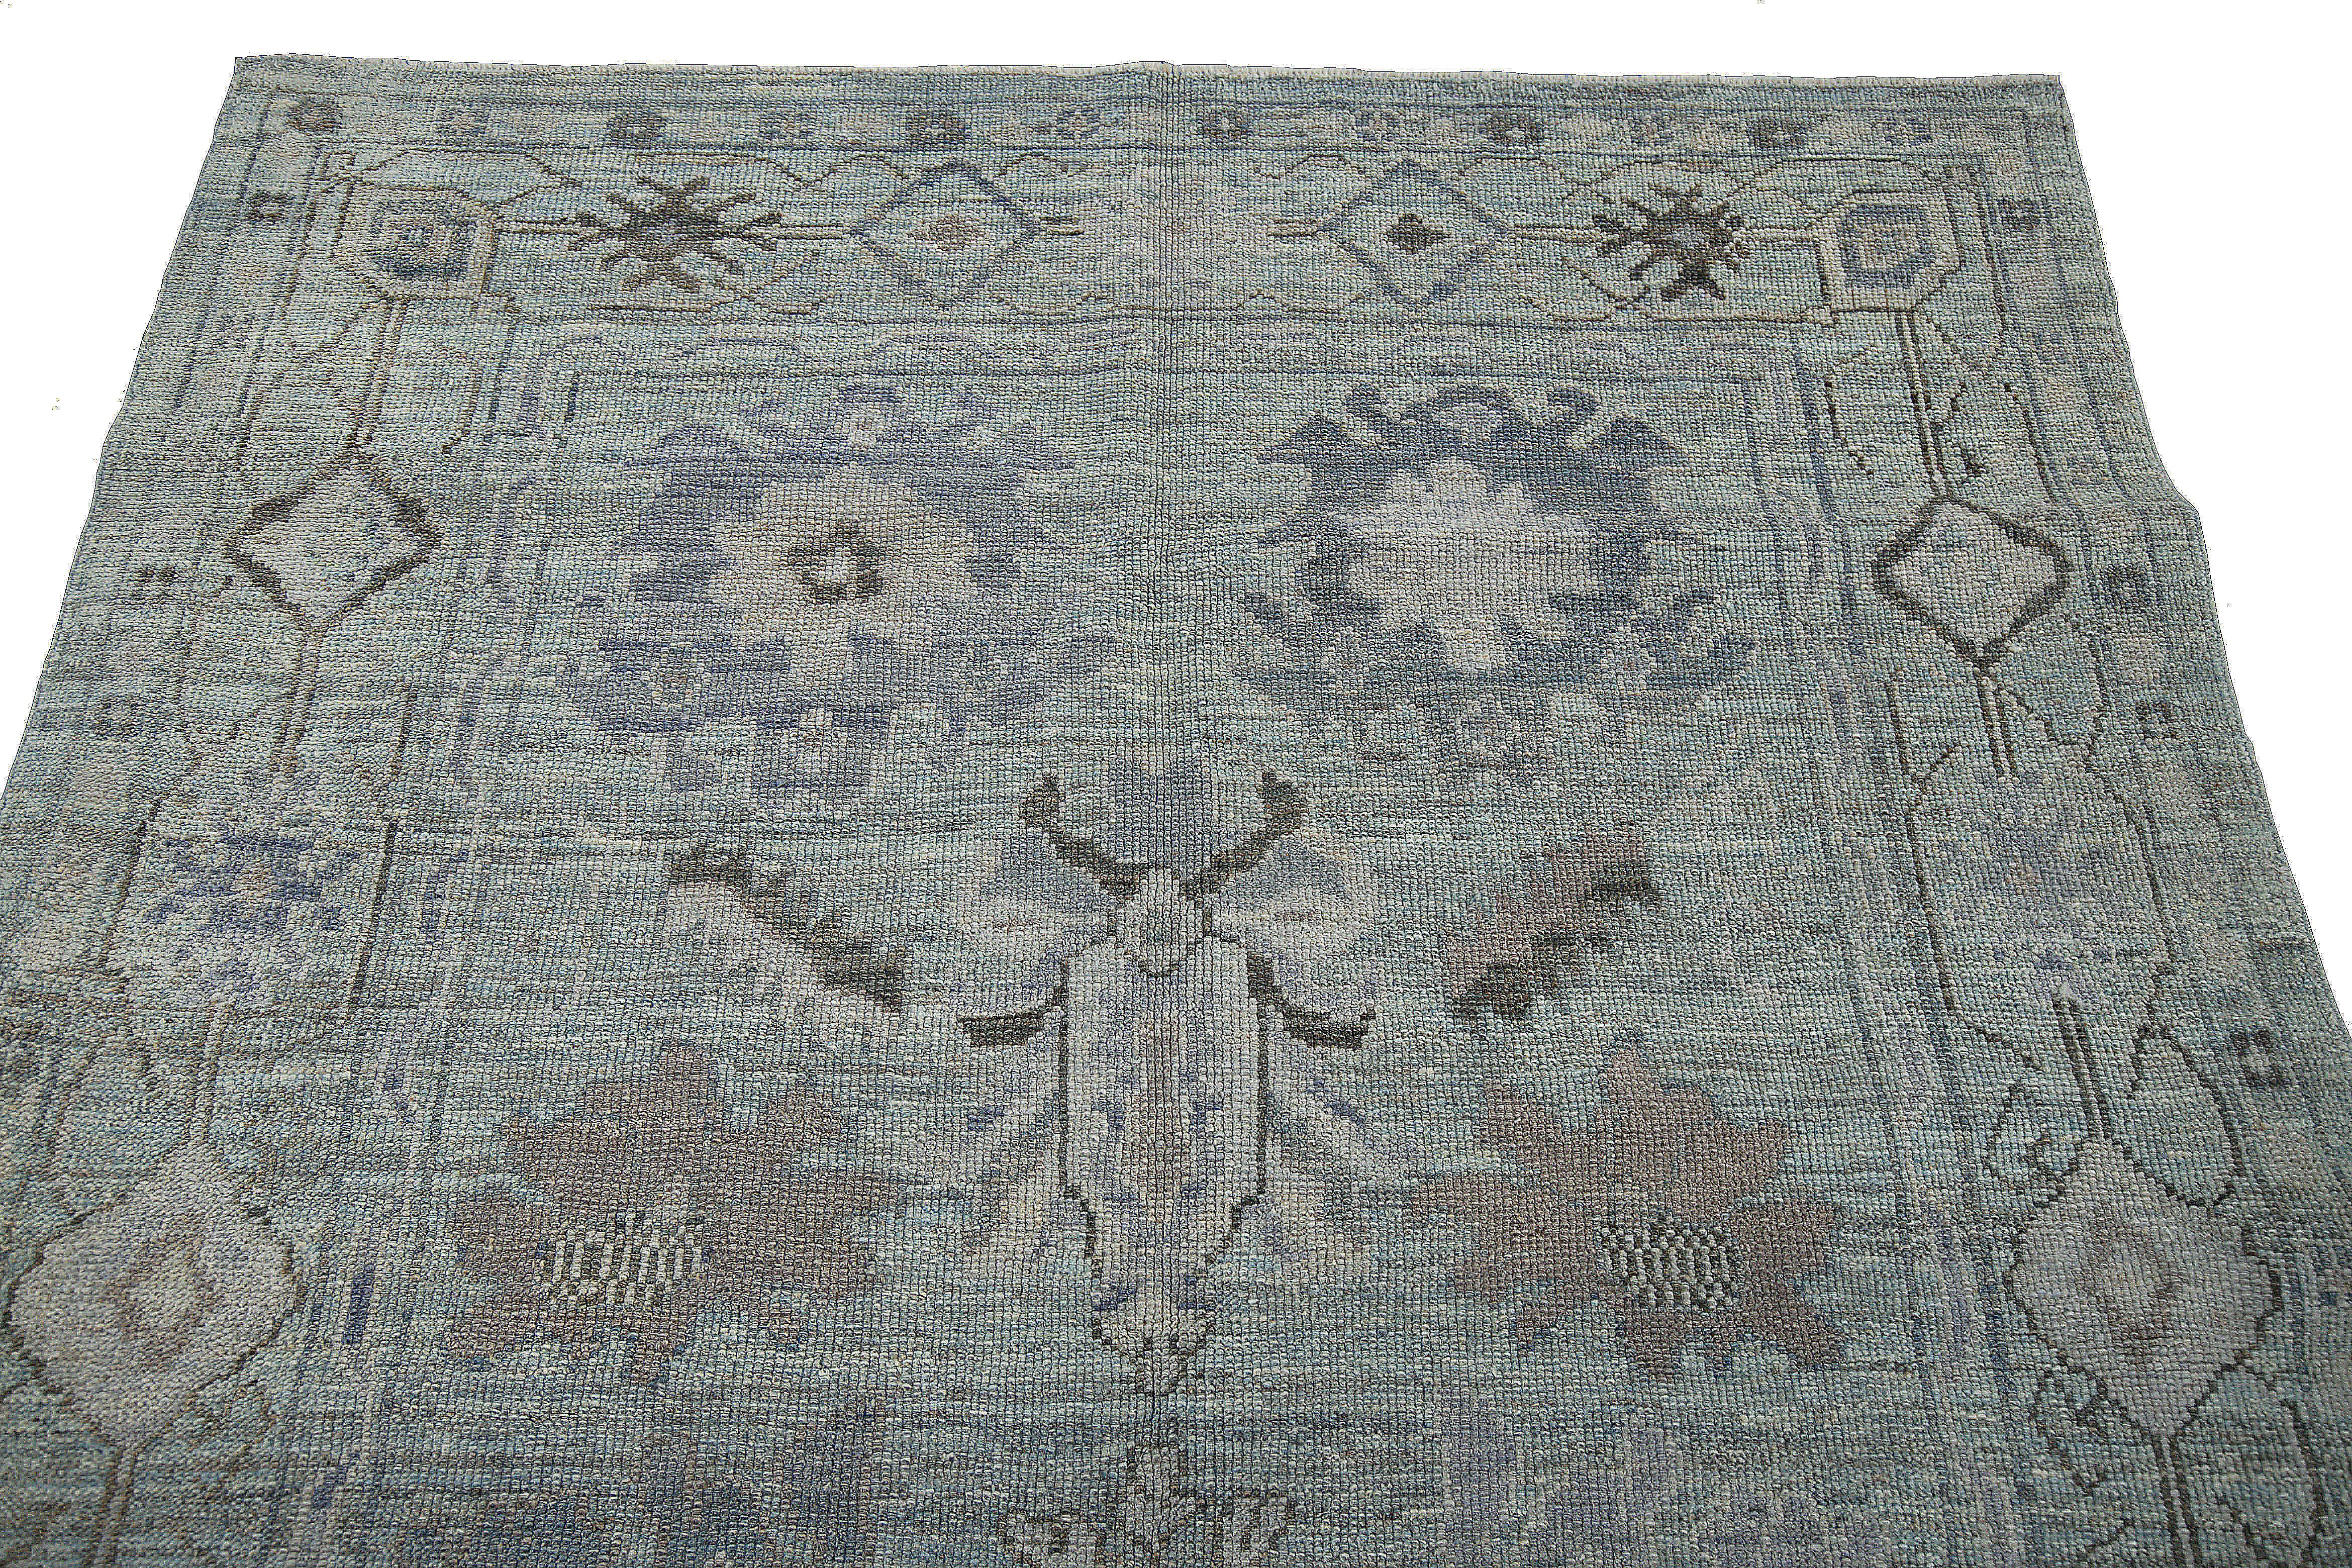 Turkish Contemporary Oushak Rug with Blue Field and Floral Patterns in Black and Gray For Sale